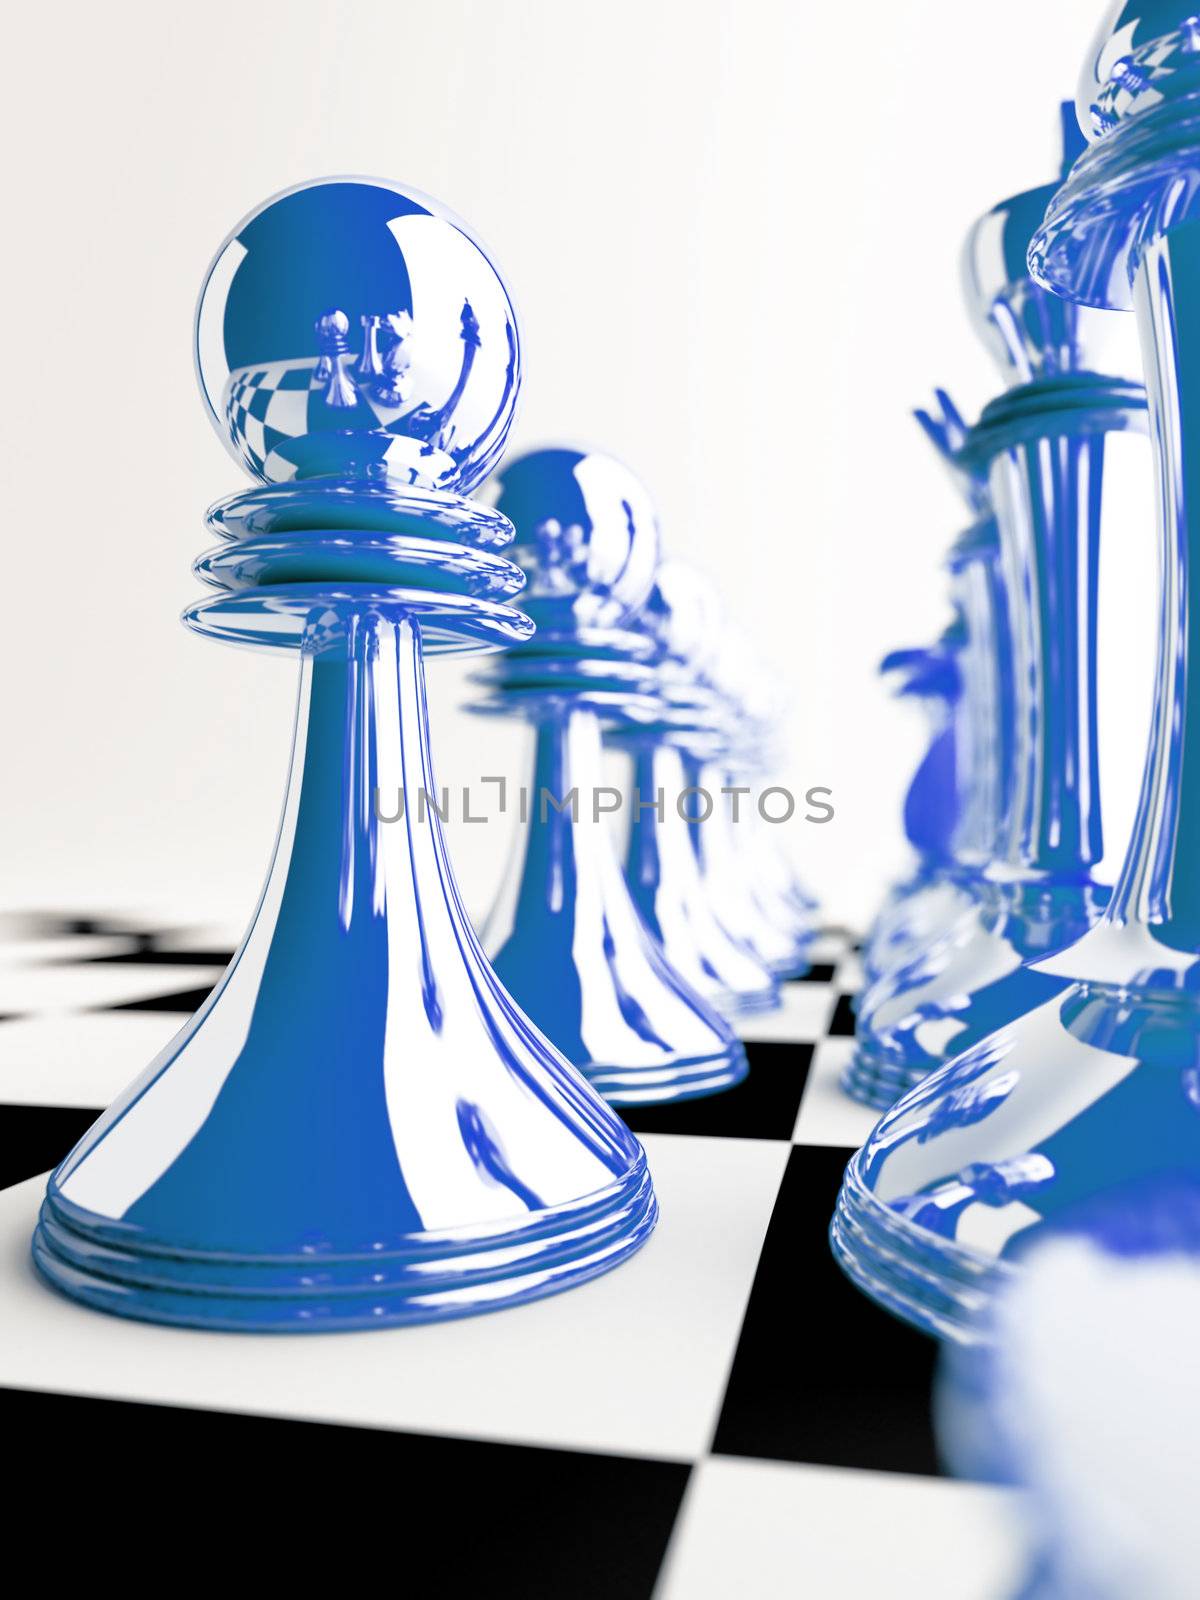 chessmen of blue color on checkered board by Serp